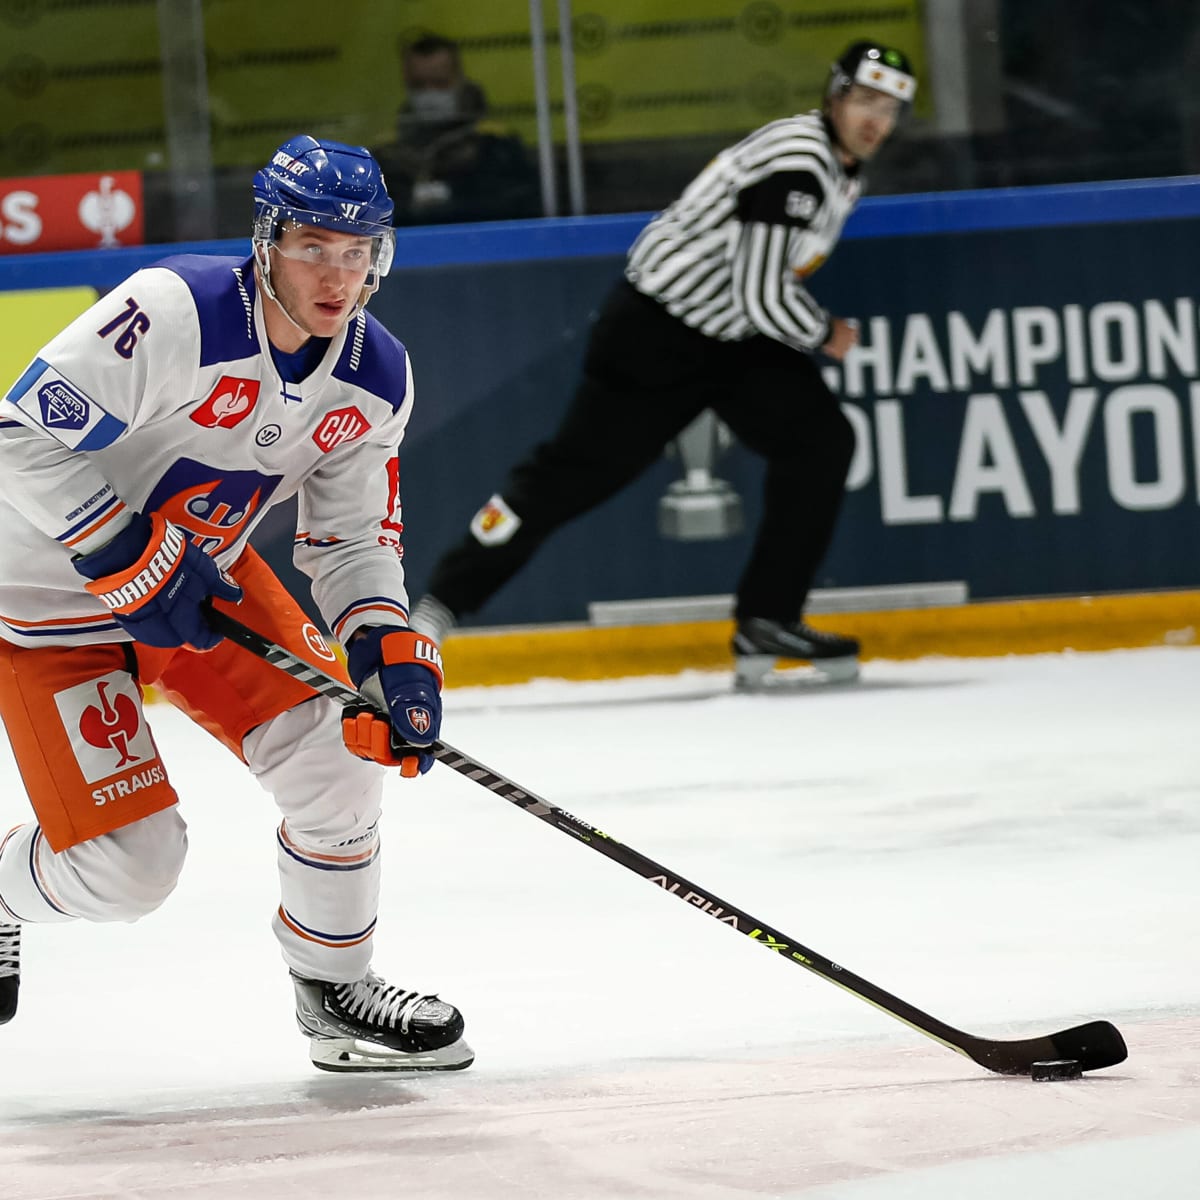 Champions Hockey League Semifinal EHC Munchen vs Tappara Live Stream Watch Online, TV Channel, Start Time - How to Watch and Stream Major League and College Sports